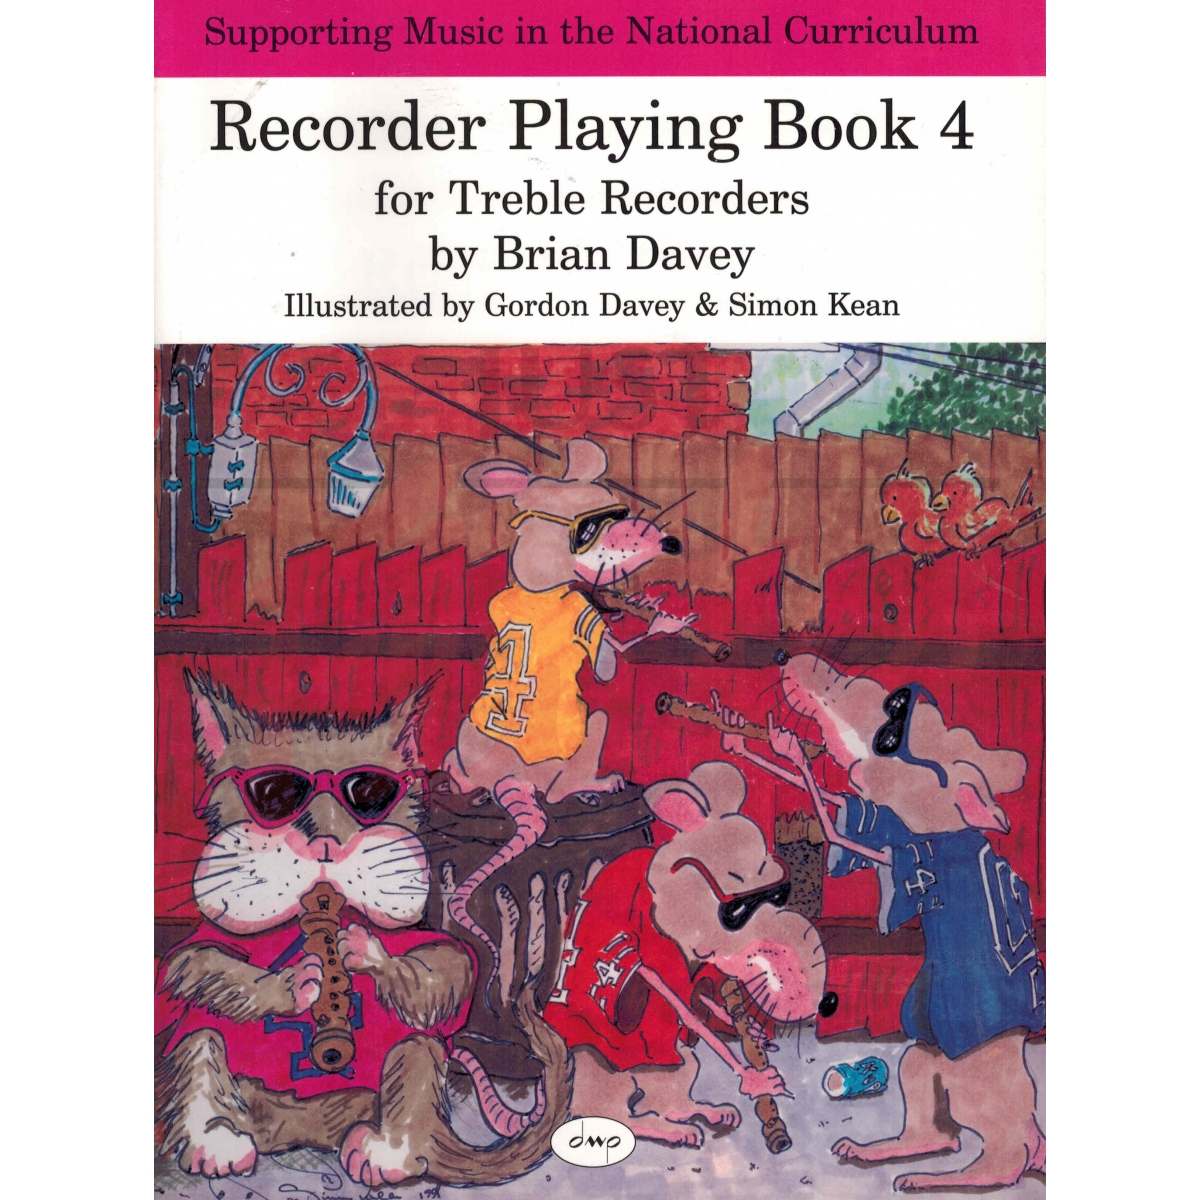 Recorder Playing Book 4 for Treble Recorders